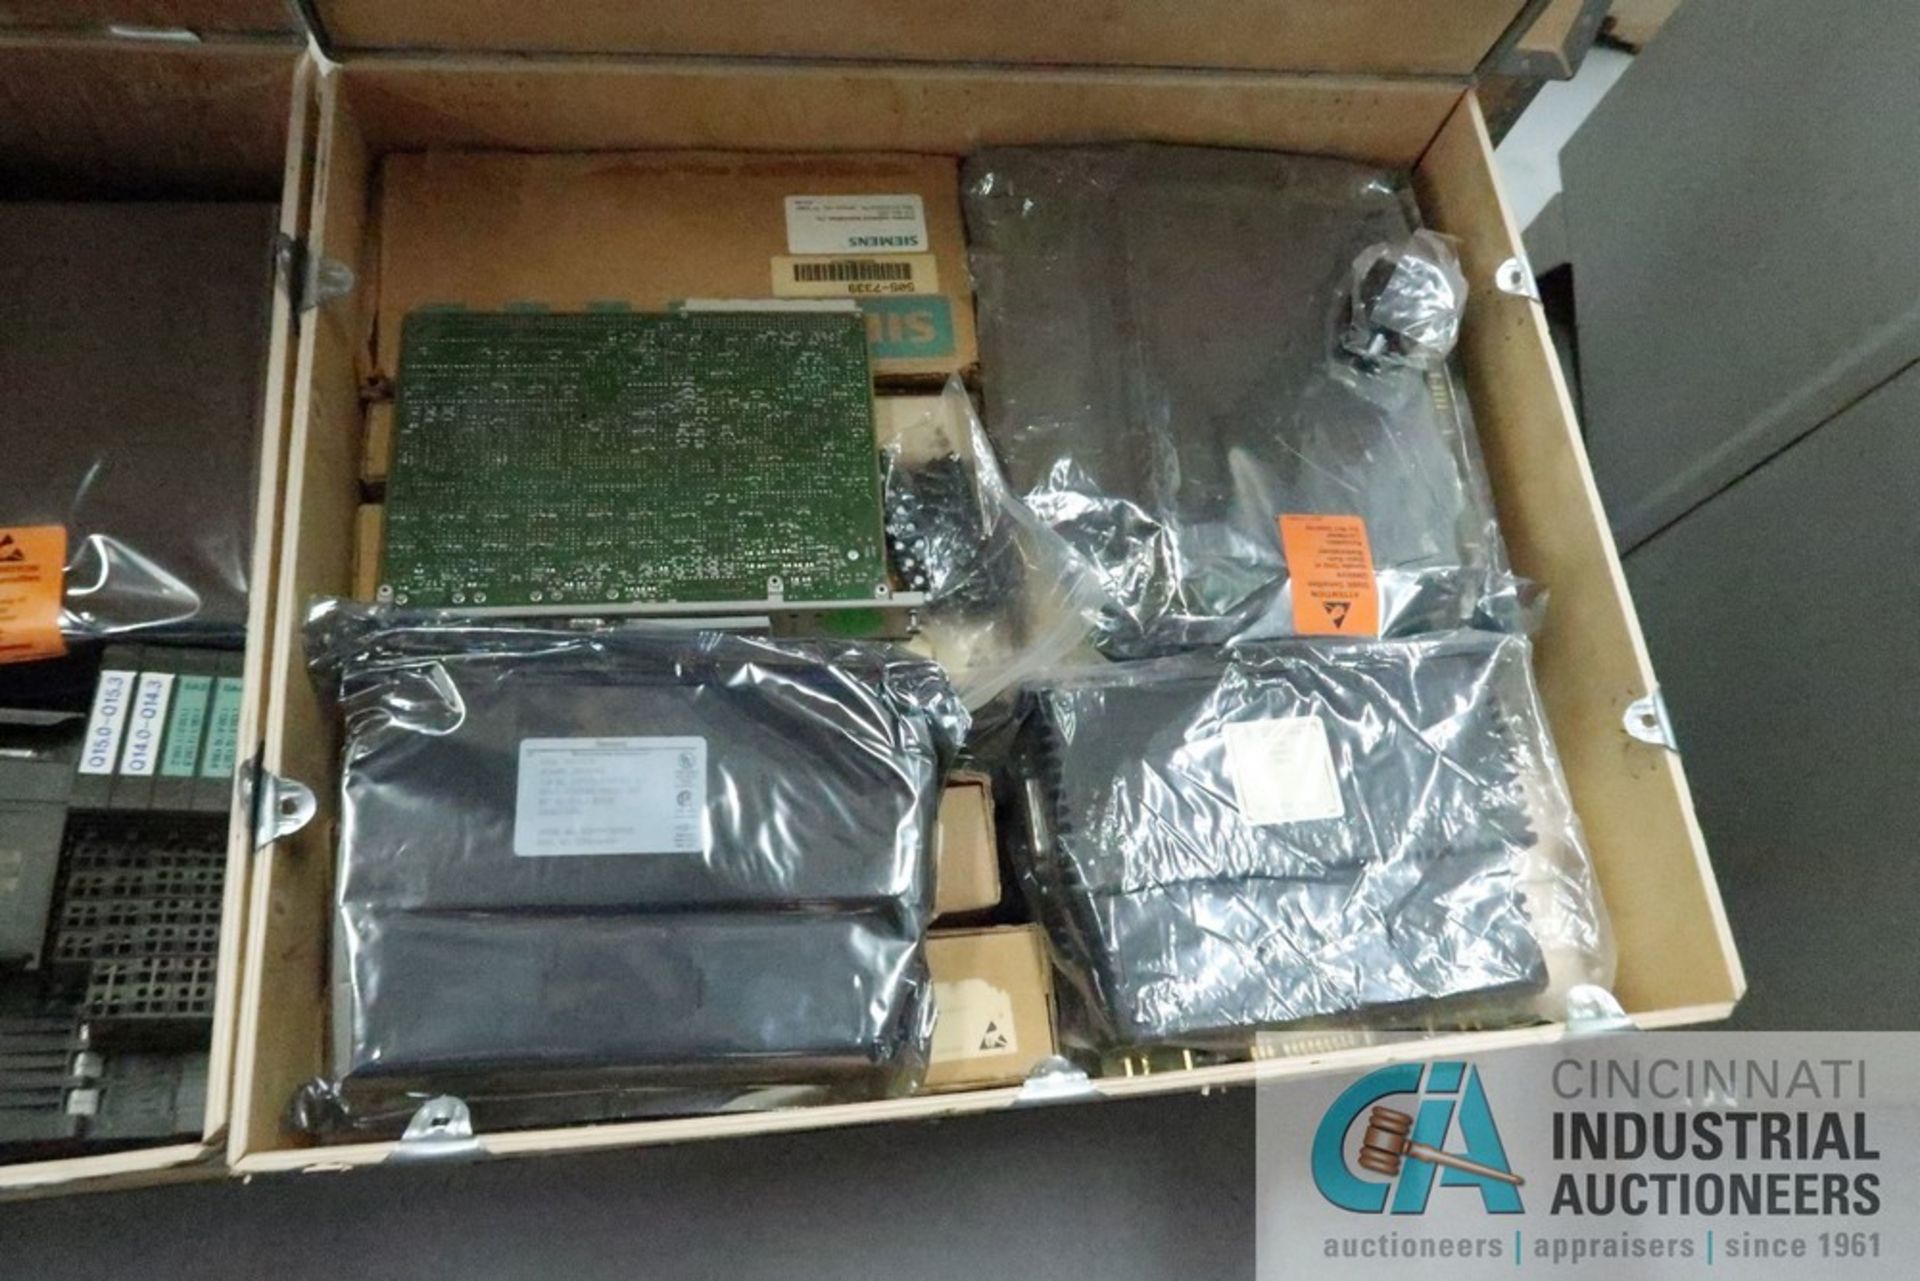 (LOT) (5) SKIDS MISC. TOUCH SCREENS, ELECTRONICS, MODULES, INVERTERS - Image 18 of 18